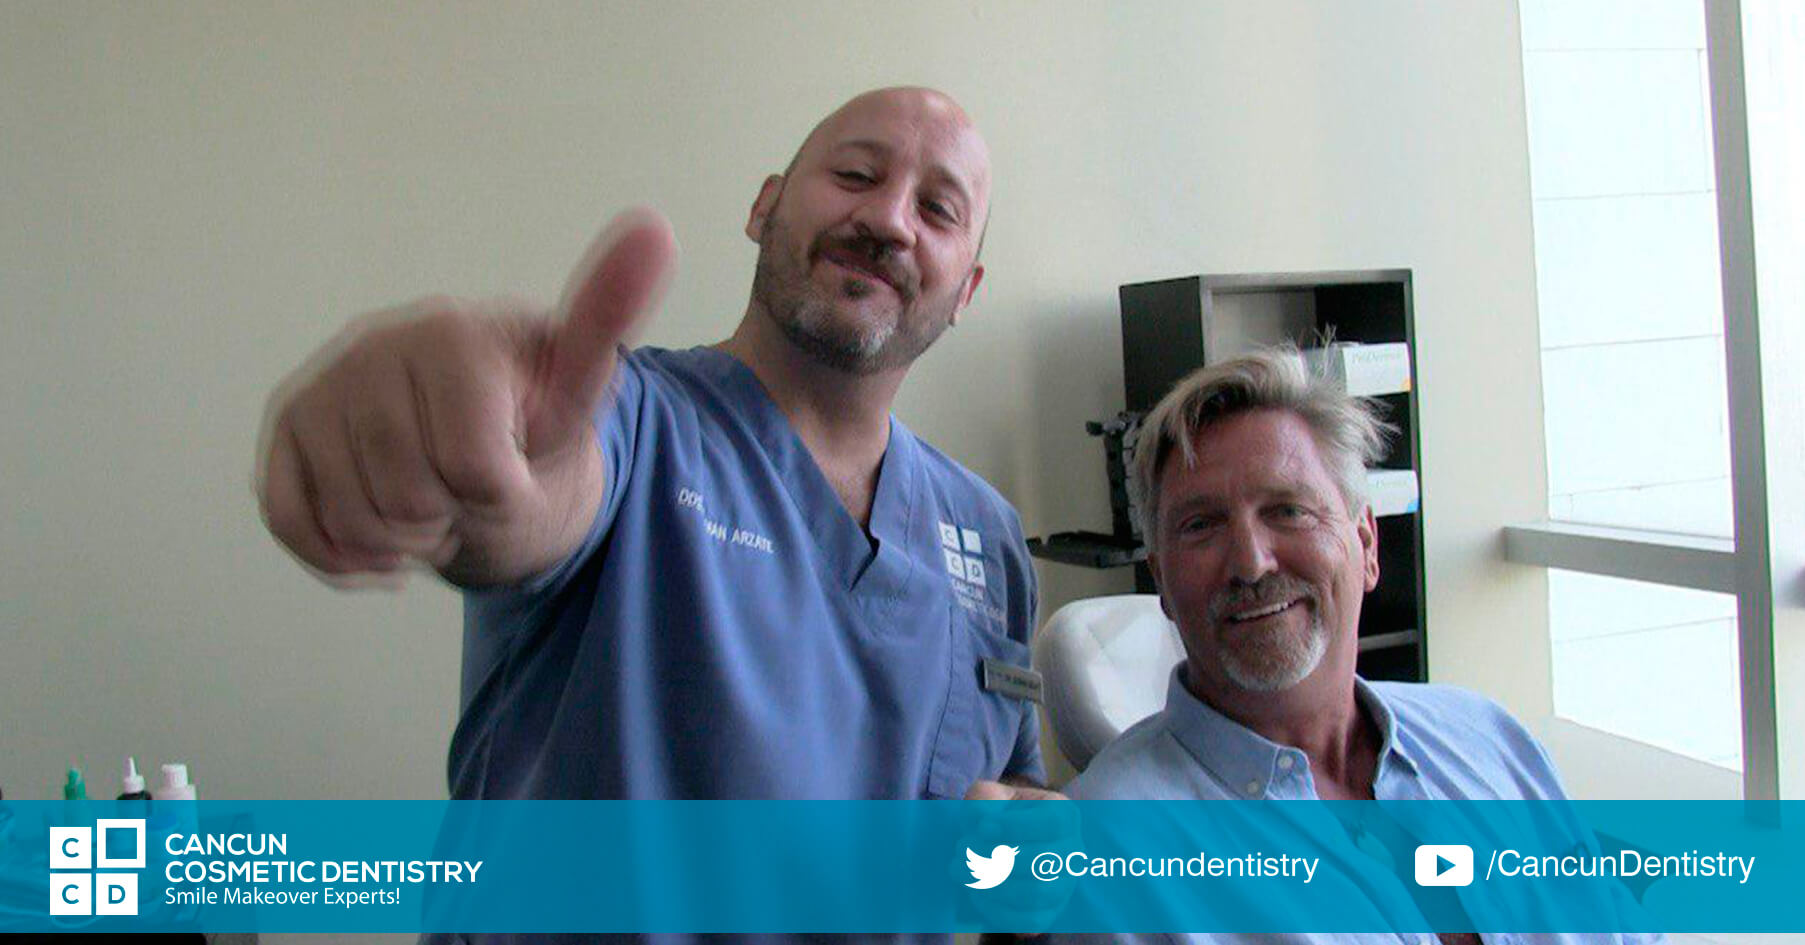 Cancun Cosmetic Dentistry has warranty on their dental pieces! Doctor German Arzate